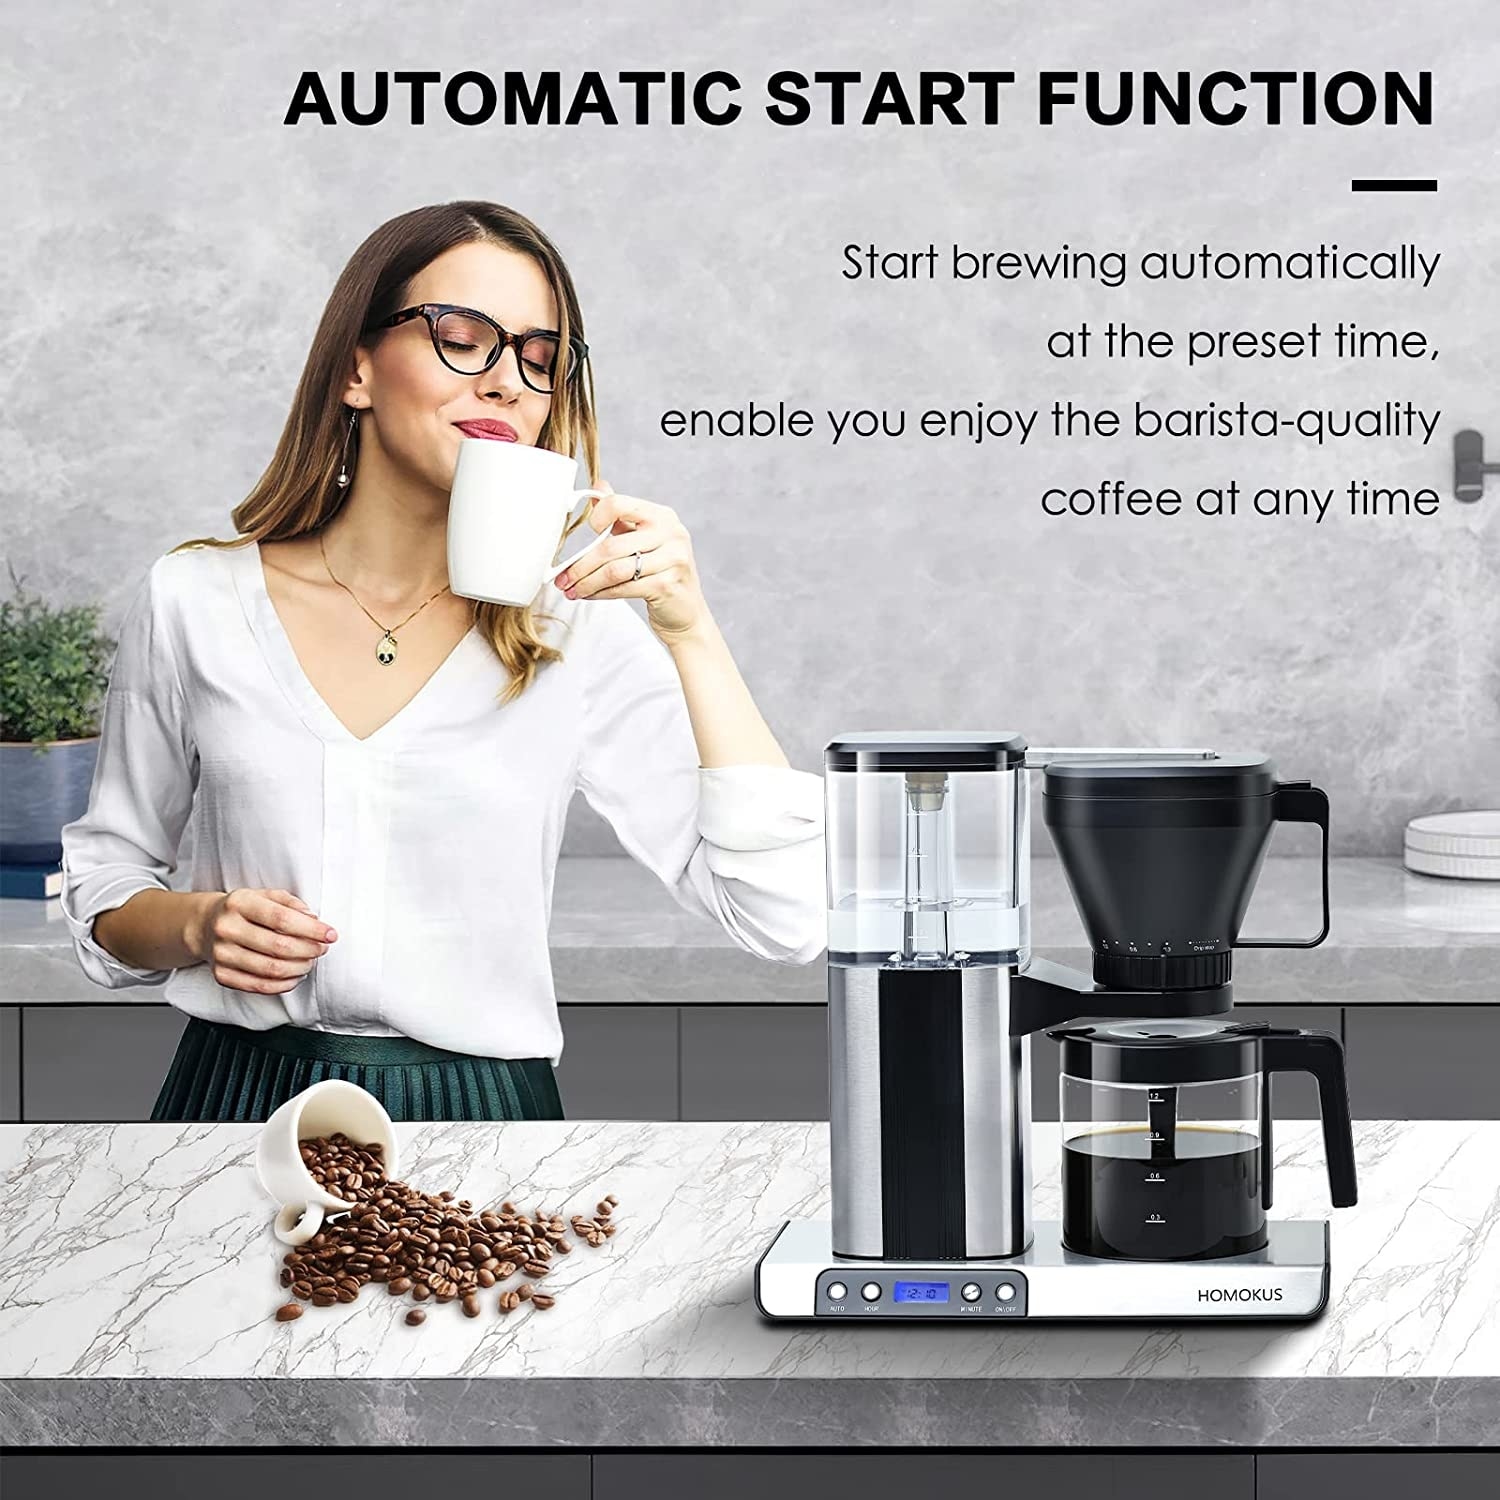 8 Cup Drip Coffee Maker - Stainless Steel Coffee Maker - Programmable Coffee Maker with Timer - As Picture